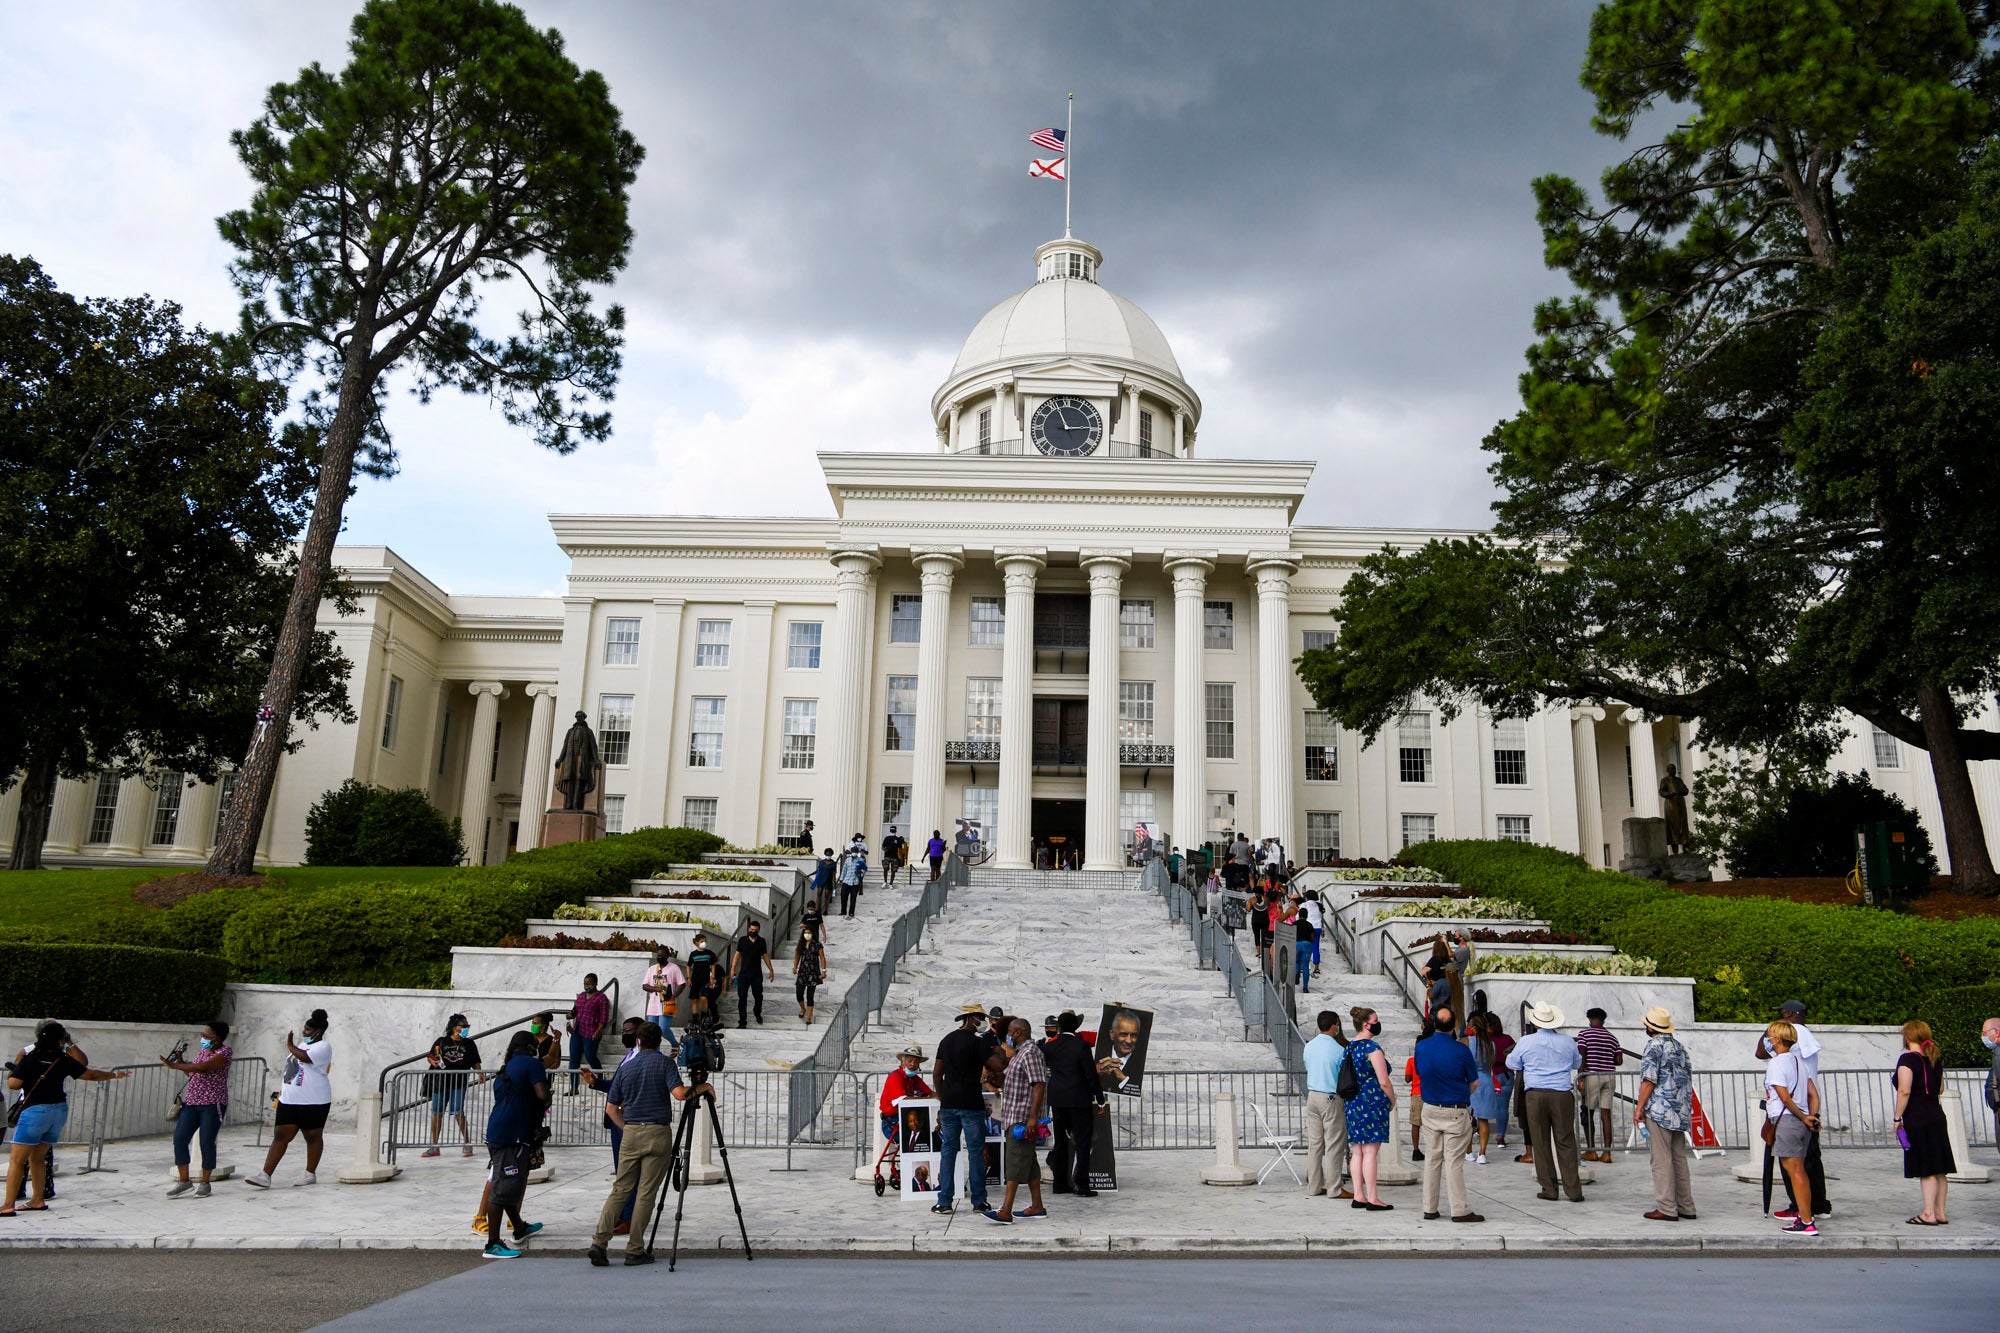 On 26 July 2020, mourners gathered at the Alabama Capitol following the death of Representative John Lewis